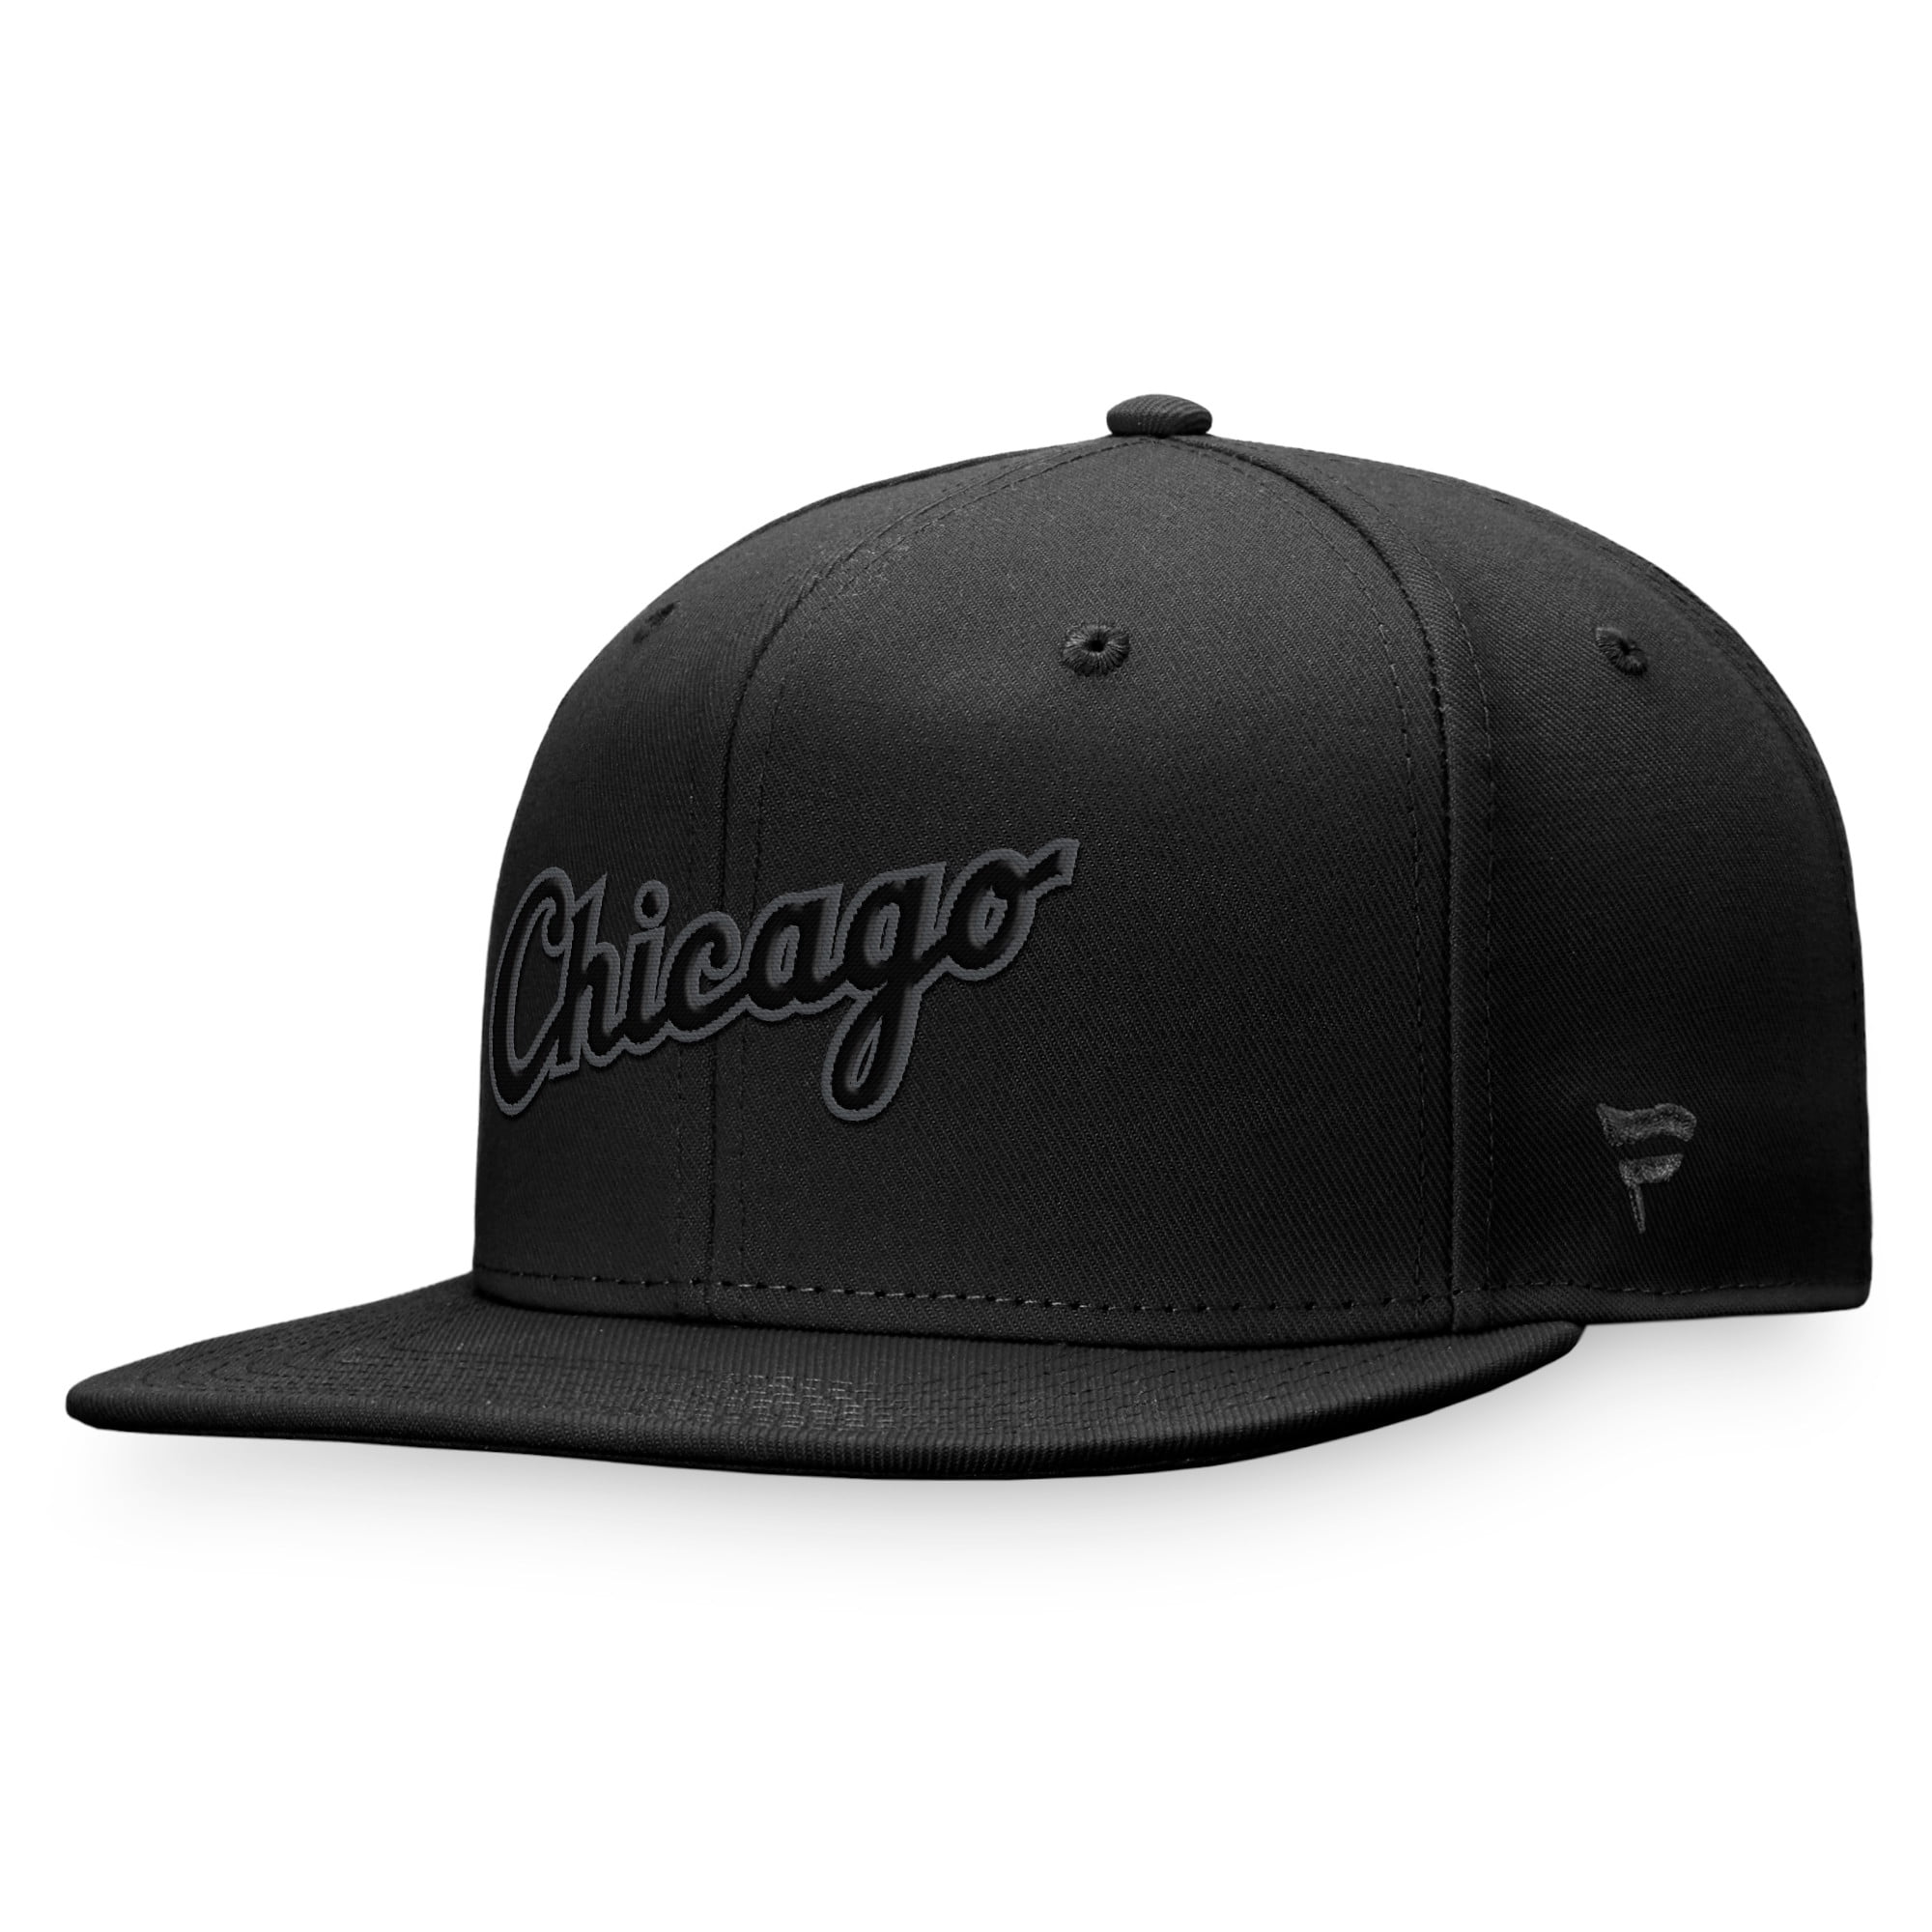 Men's Fanatics Branded Chicago White Sox Black on Black Fitted Hat ...